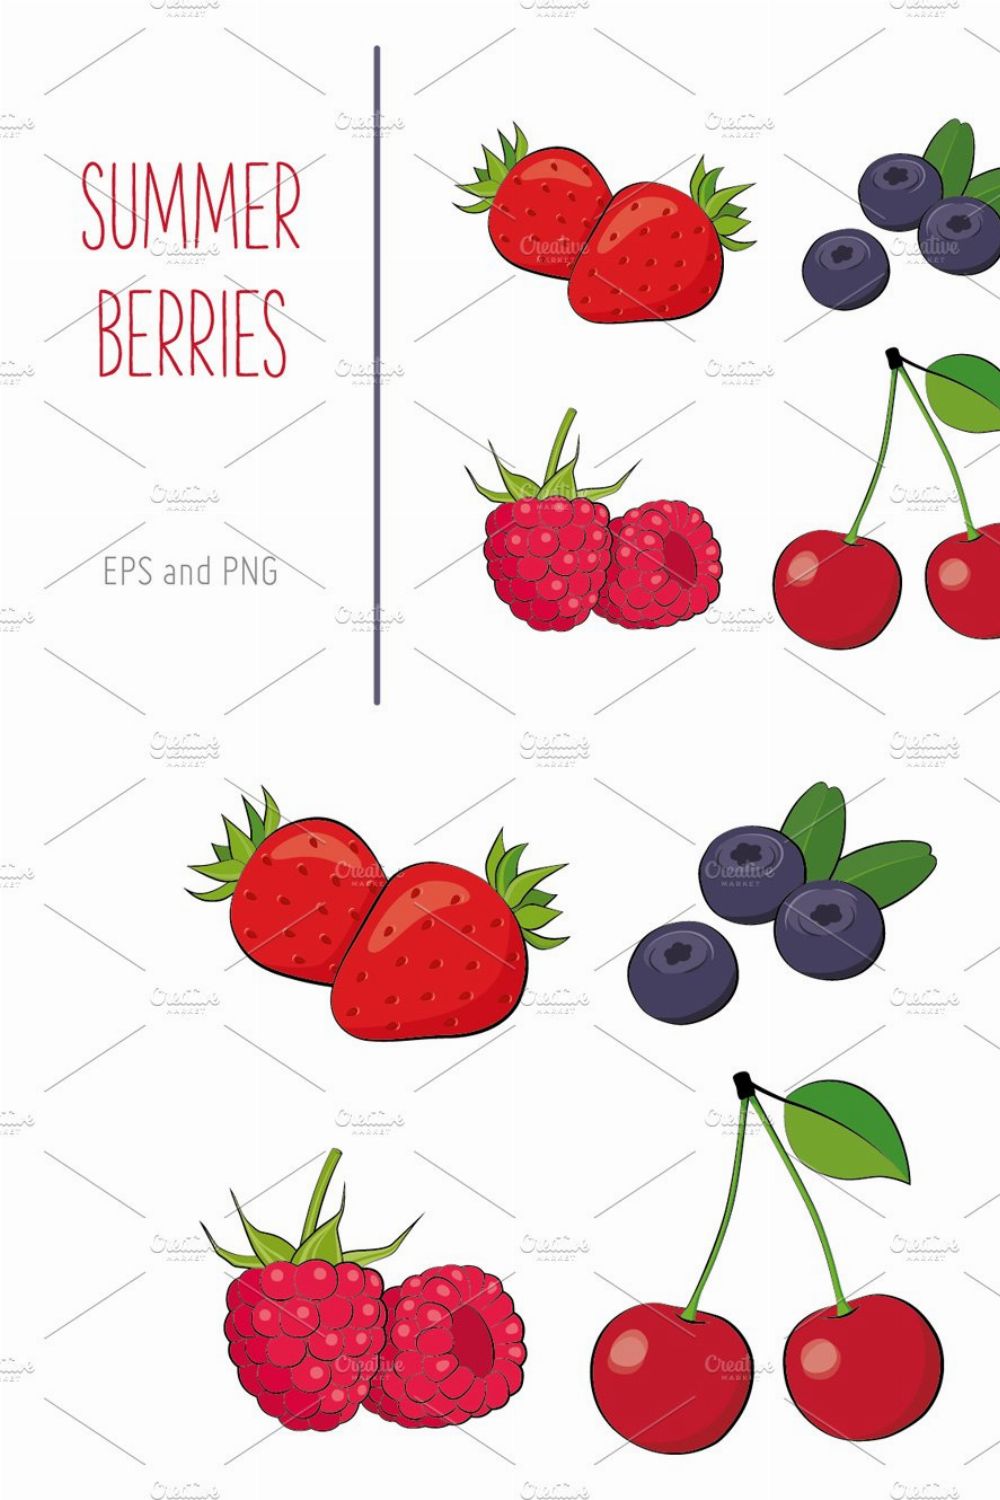 Summer berries pinterest preview image.